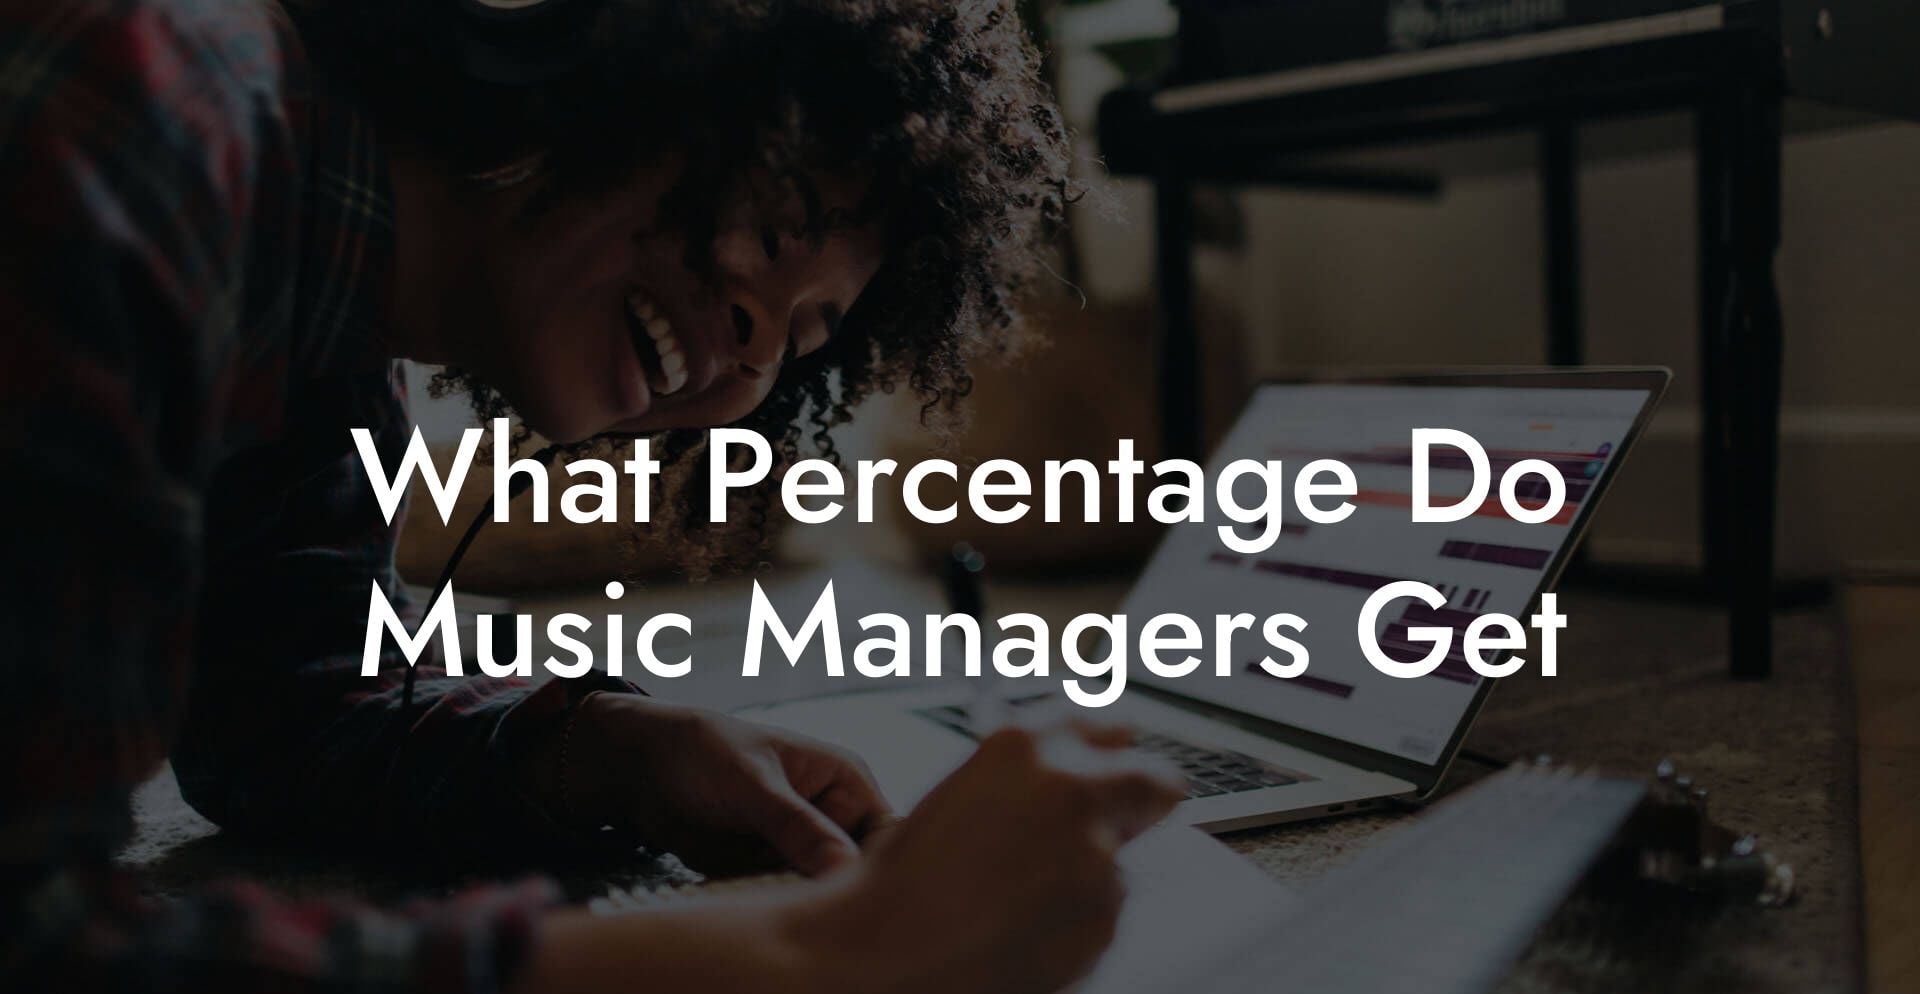 What Percentage Do Music Managers Get